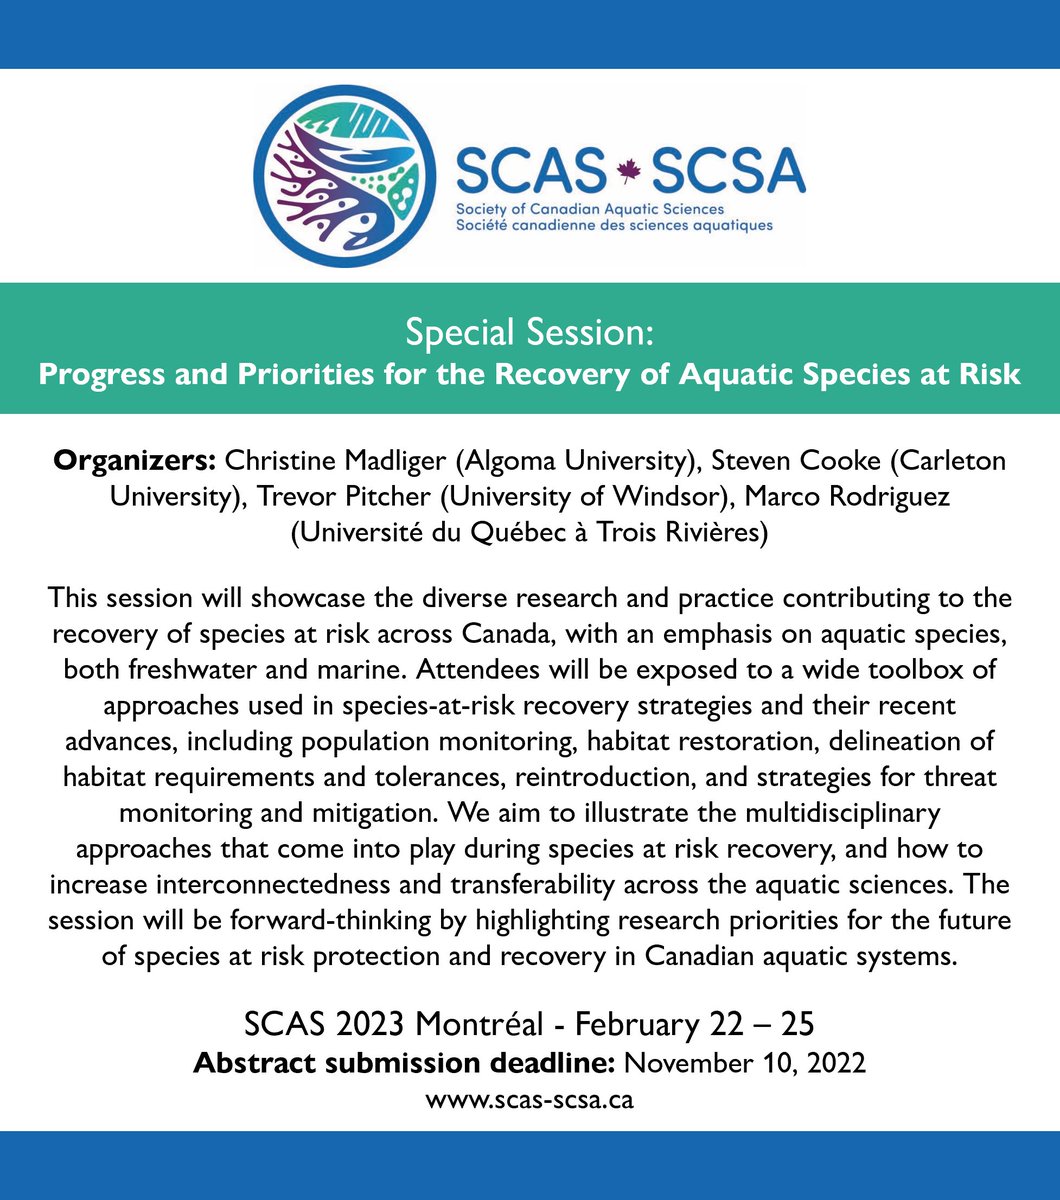 Are you researching aquatic species at risk? Consider joining our @scas_scsa special session: Progress and Priorities for the Recovery of Aquatic Species at Risk. Abstracts due Nov. 10. More details below. DM me with questions! scas-scsa.ca/Registration-&…